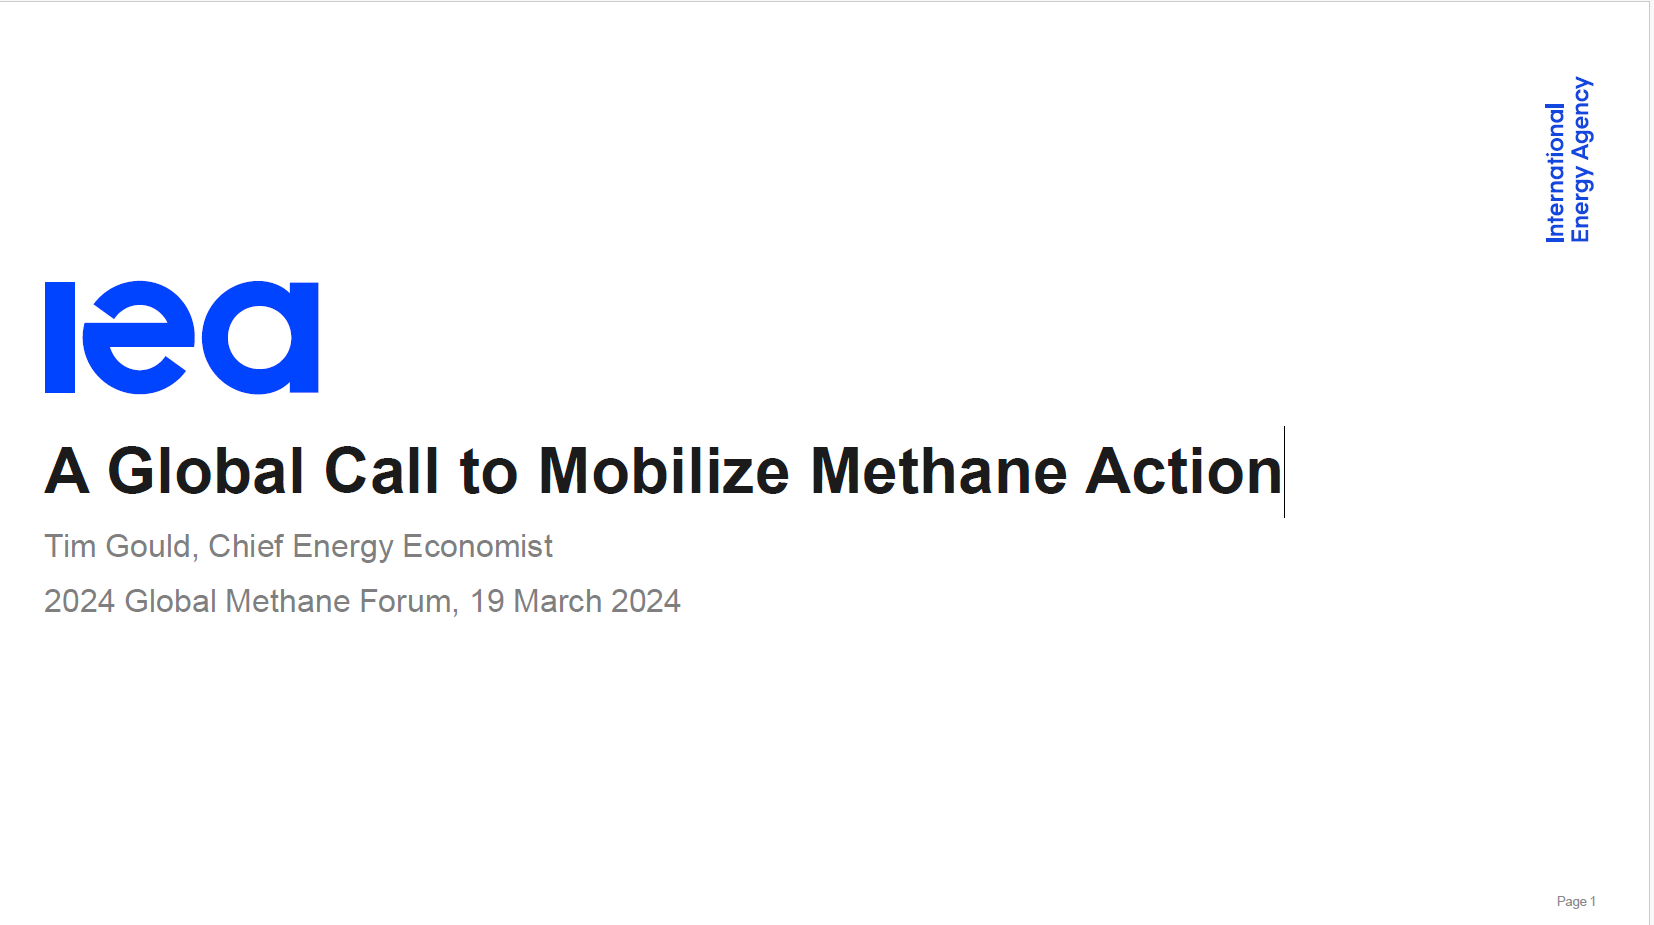 A Global Call to Mobilize Methane Action